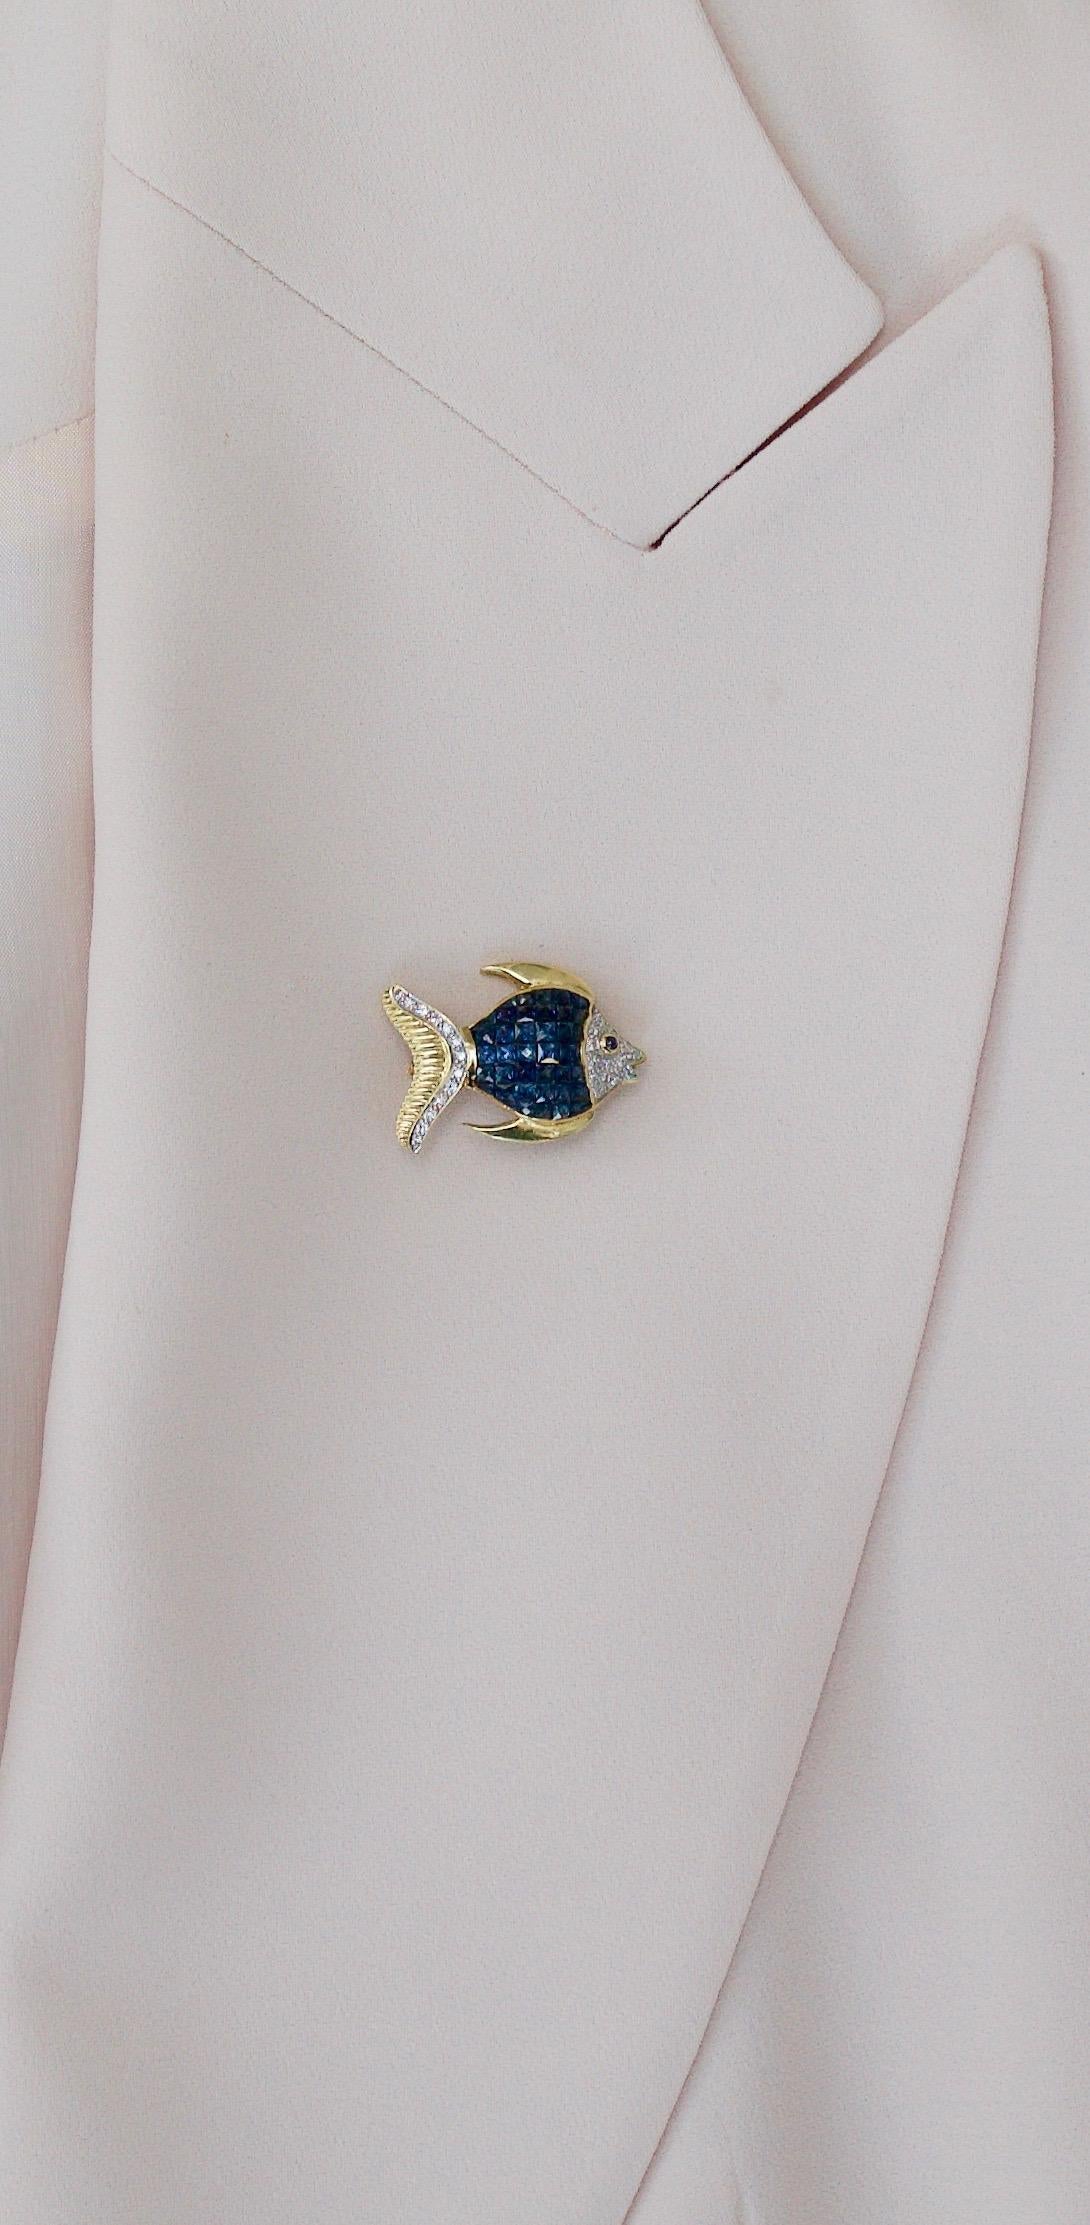 Invisibly Set Sapphire and Diamond Fish Brooch in 18k Yellow Gold
Designed Depicting a Typical Fish You Will See Snorkeling In Front of Our Salon in Maui
Thirty Nine Fancy French Cut Sapphires  Weighing 5.01 Carats [before cutting] 
Twelve Round